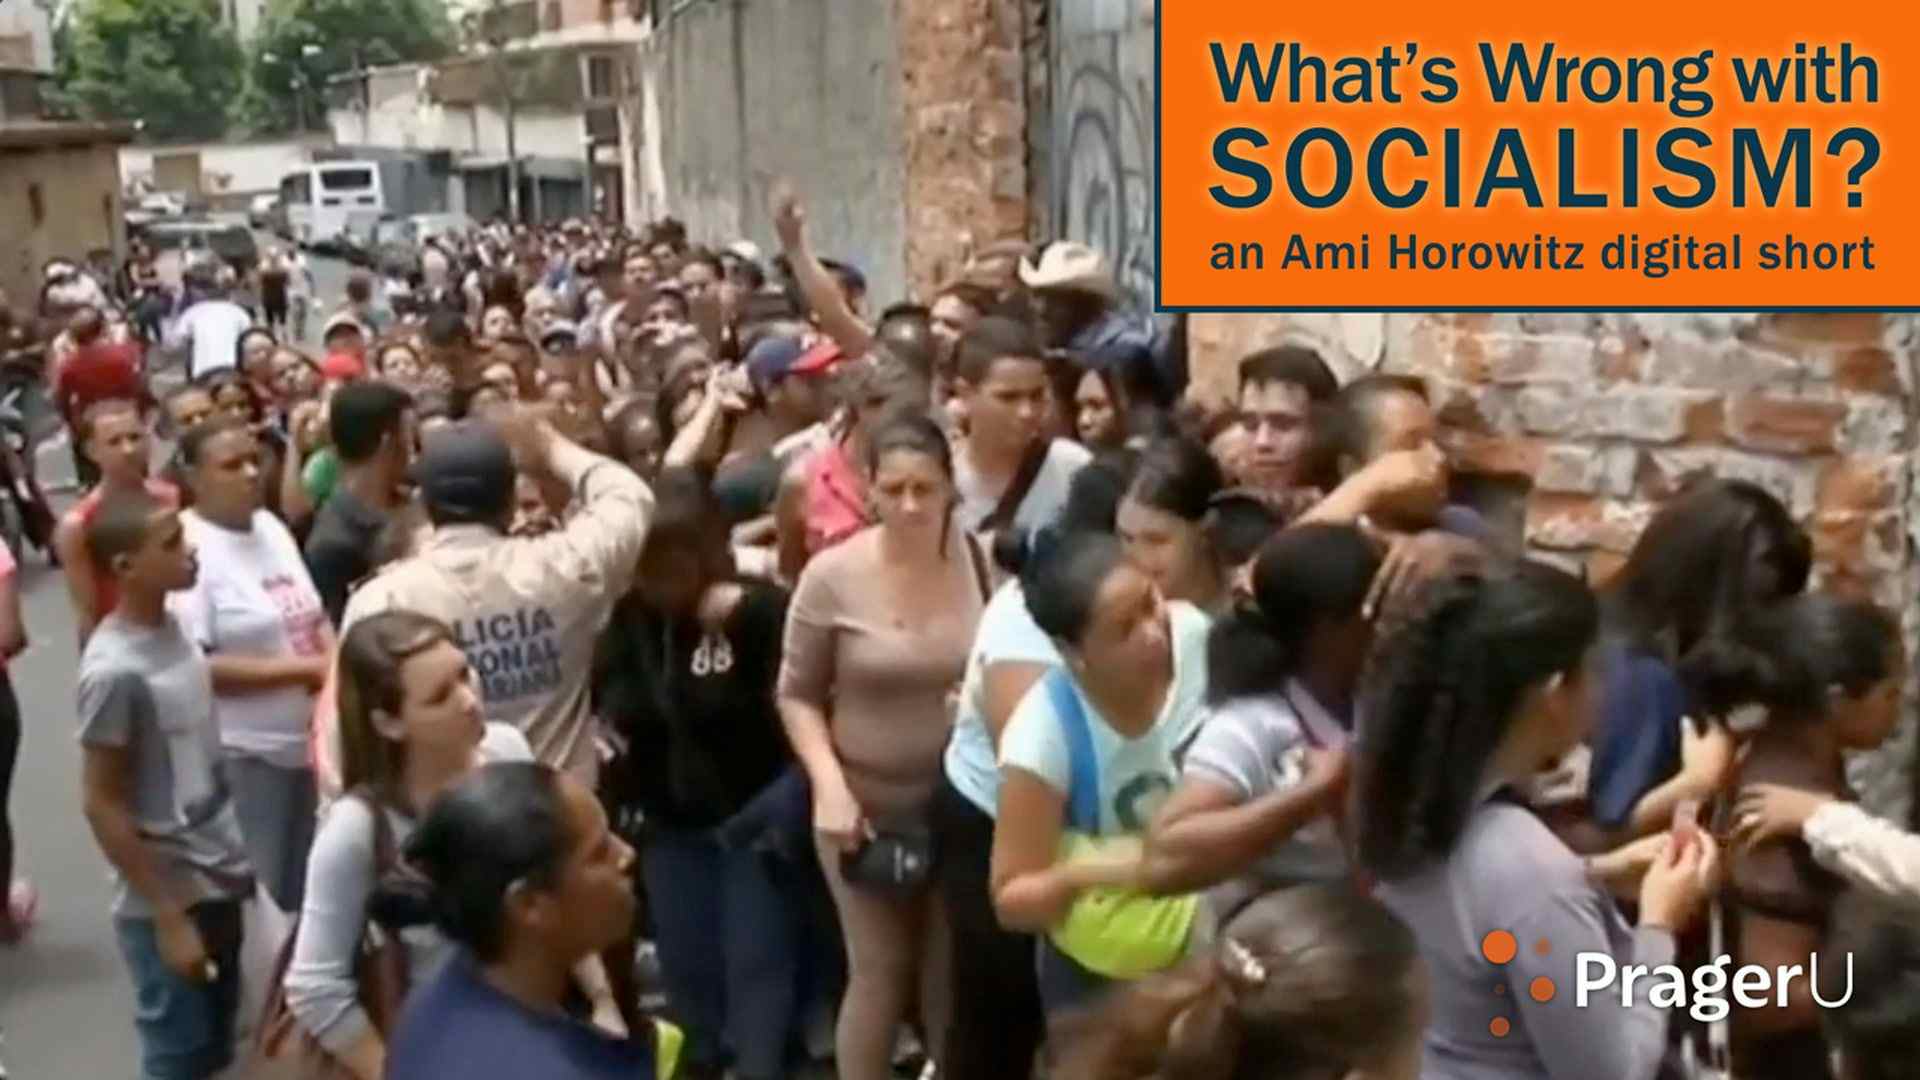 What's Wrong with Socialism? Firsthand account by filmmaker Ami Horowitz.